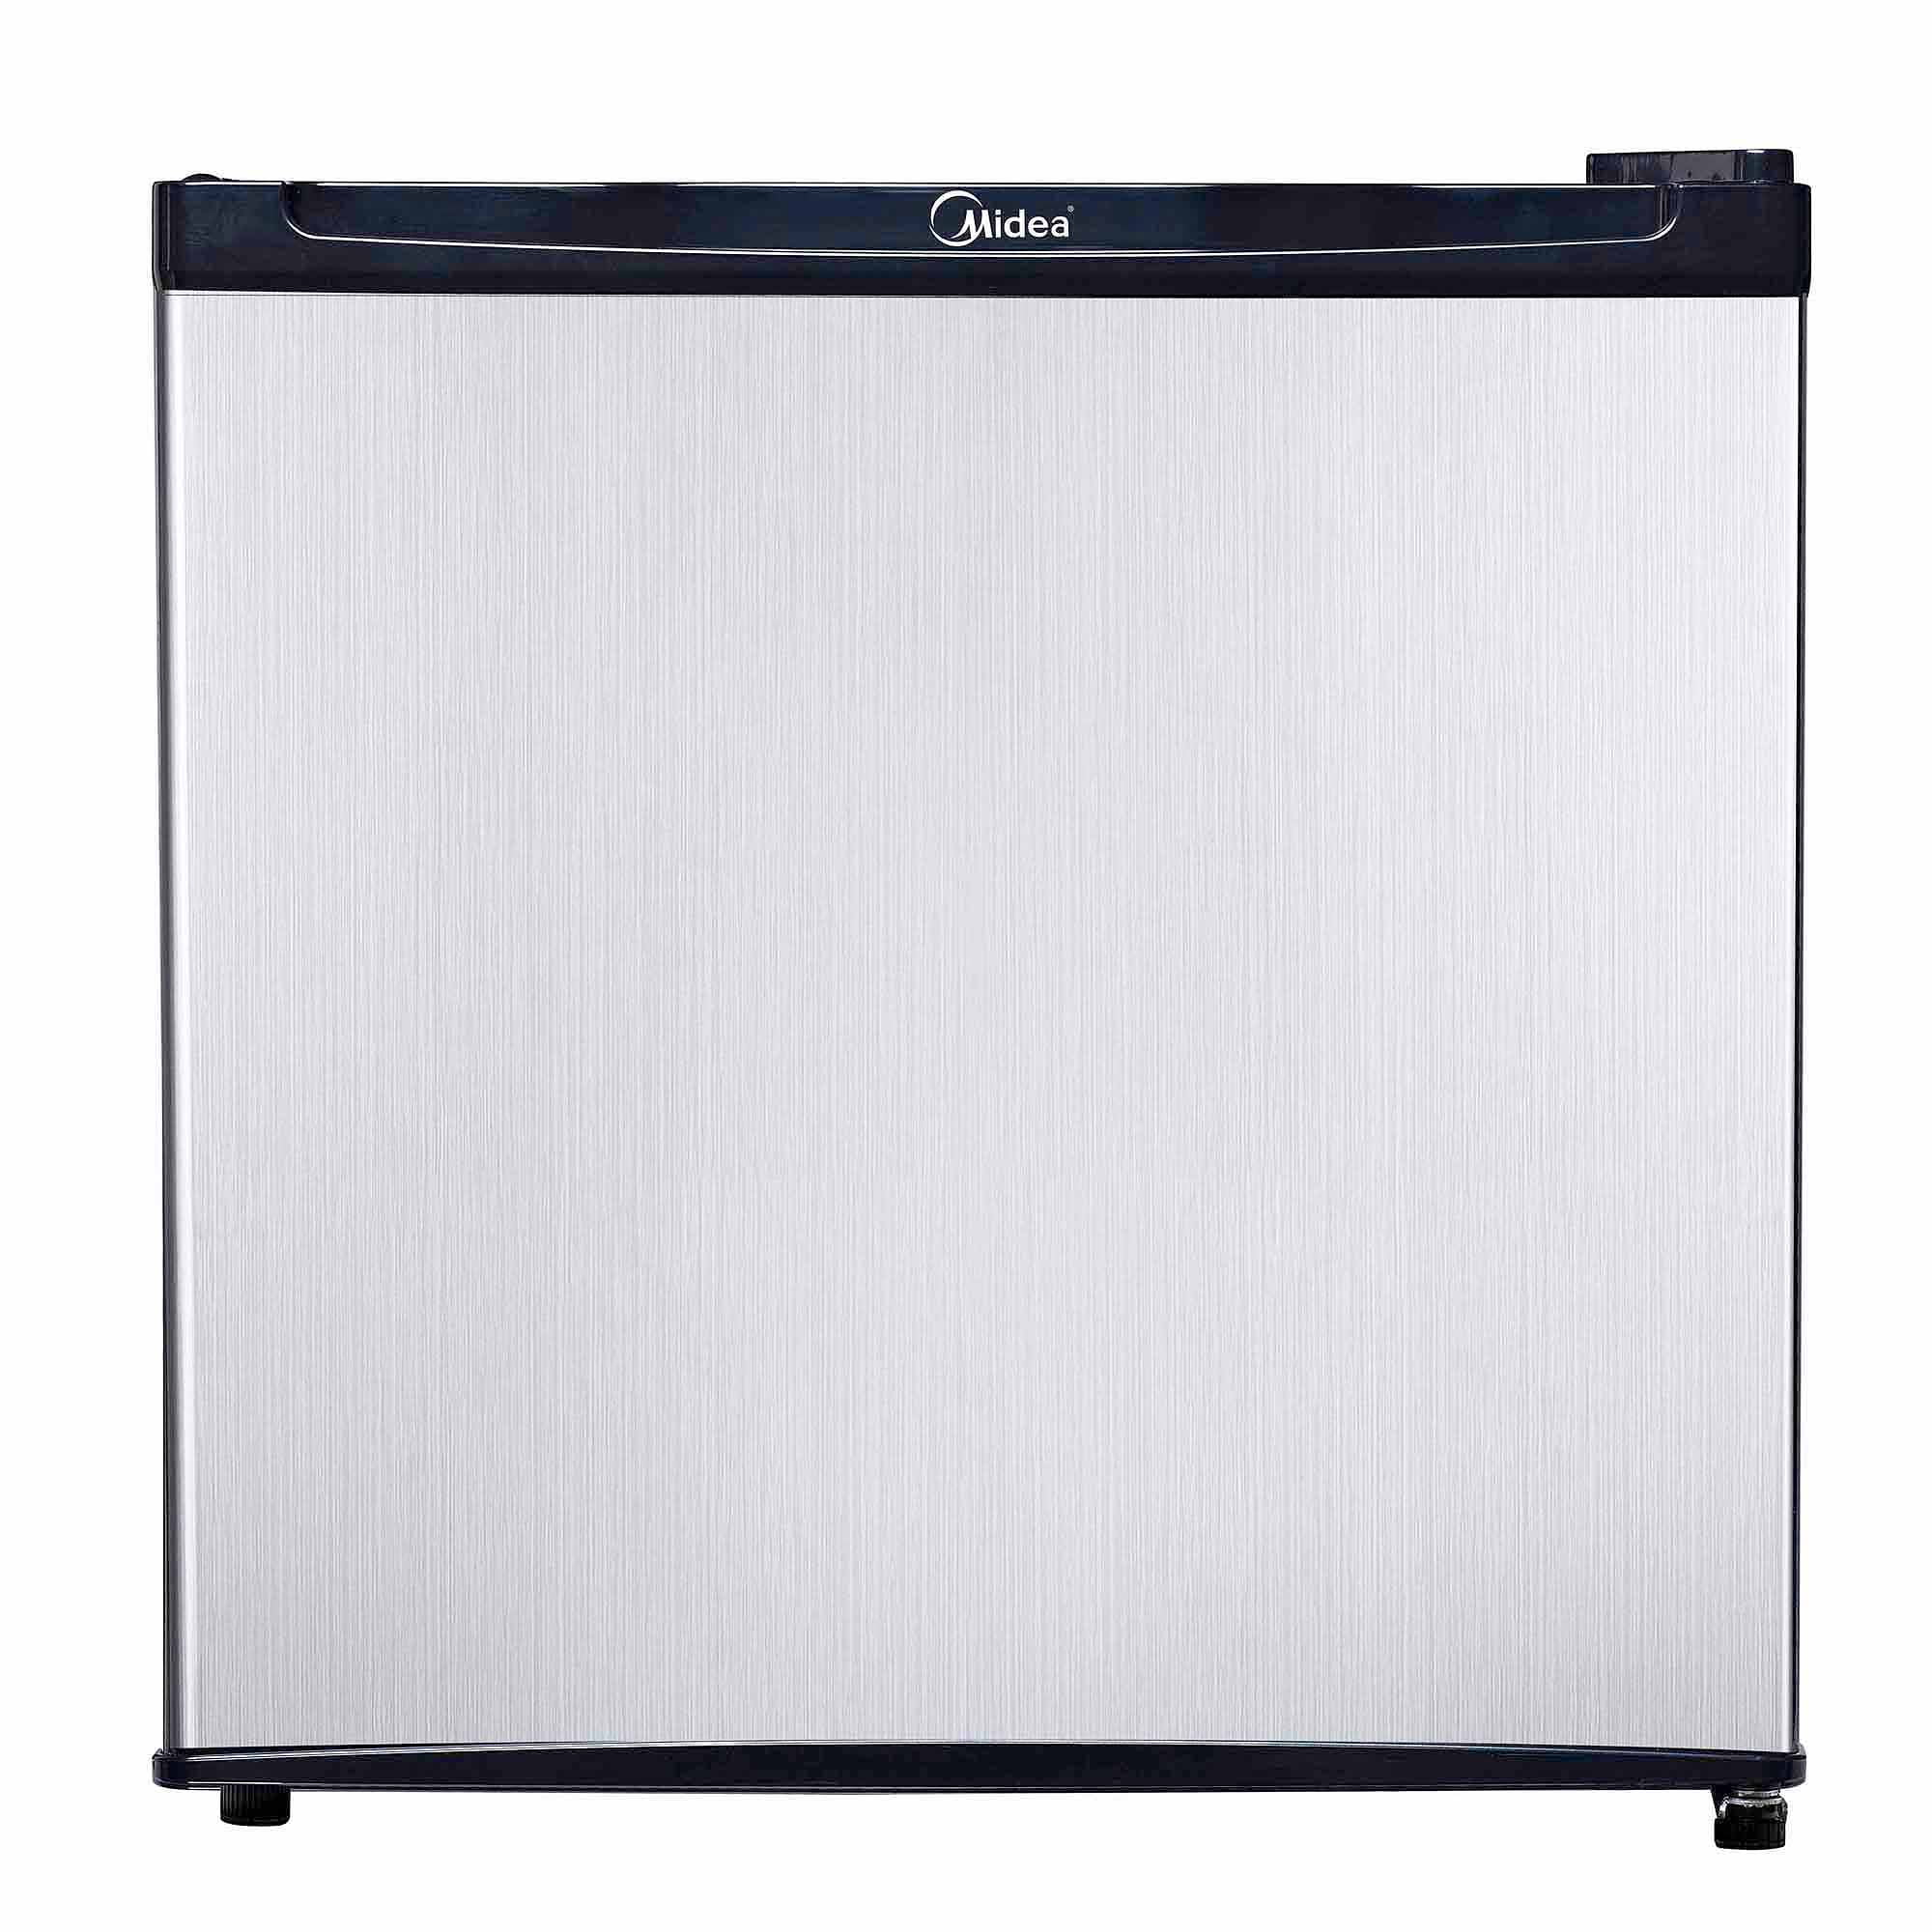 1.6 Cu. Ft. Capacity ENERGY STAR® Qualified Compact Refrigerator